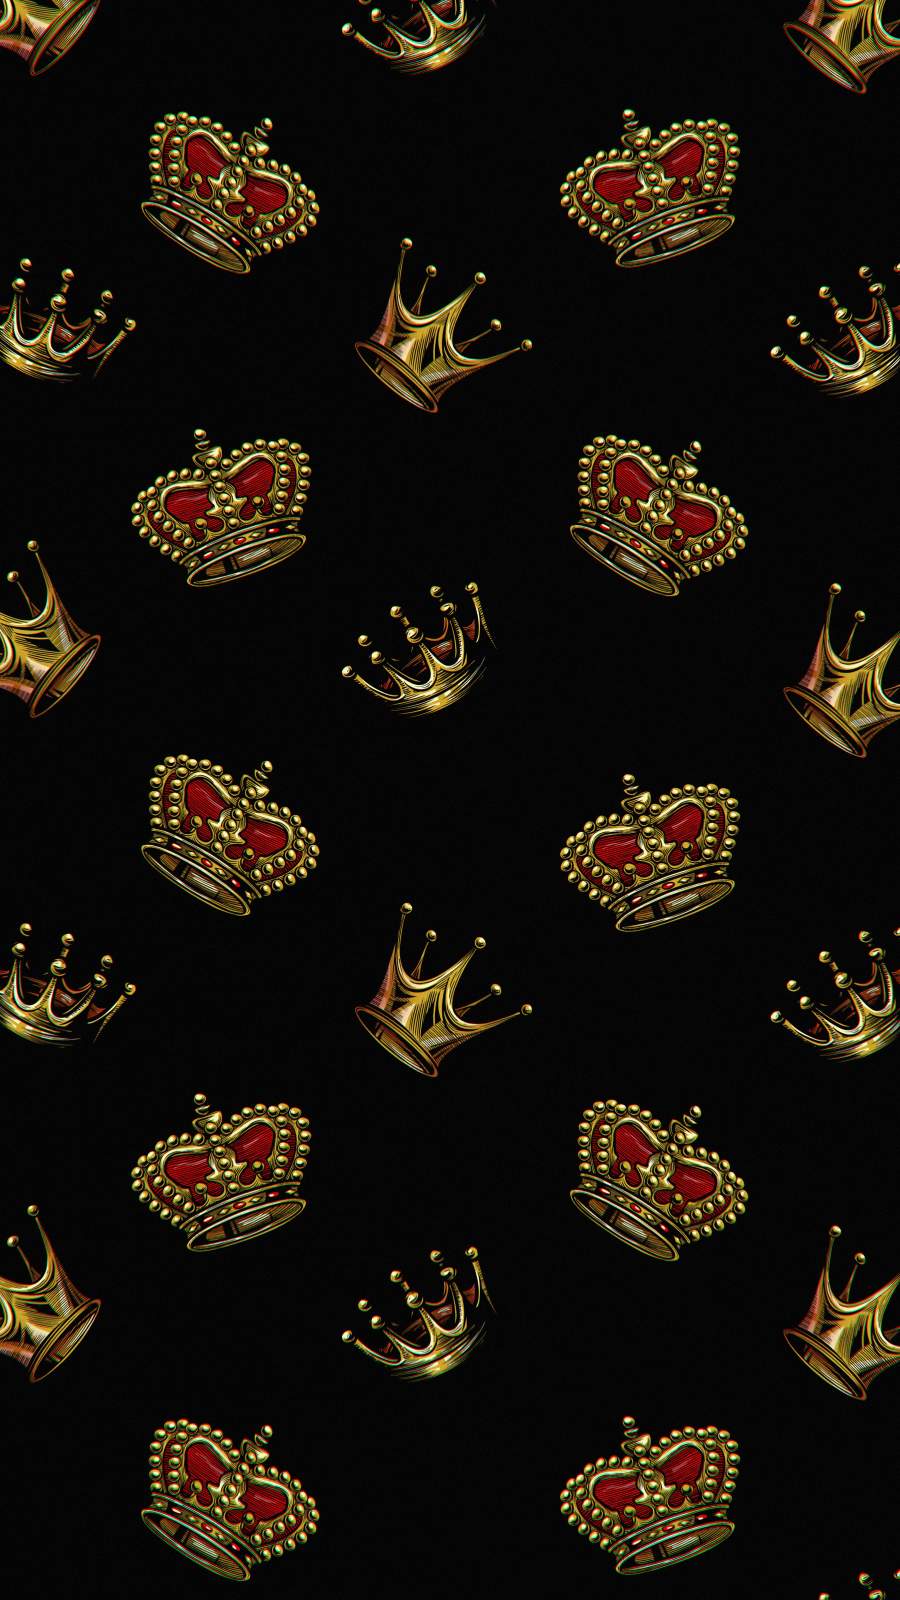 Kings Crown wallpaper by NikkiFrohloff  Download on ZEDGE  1189